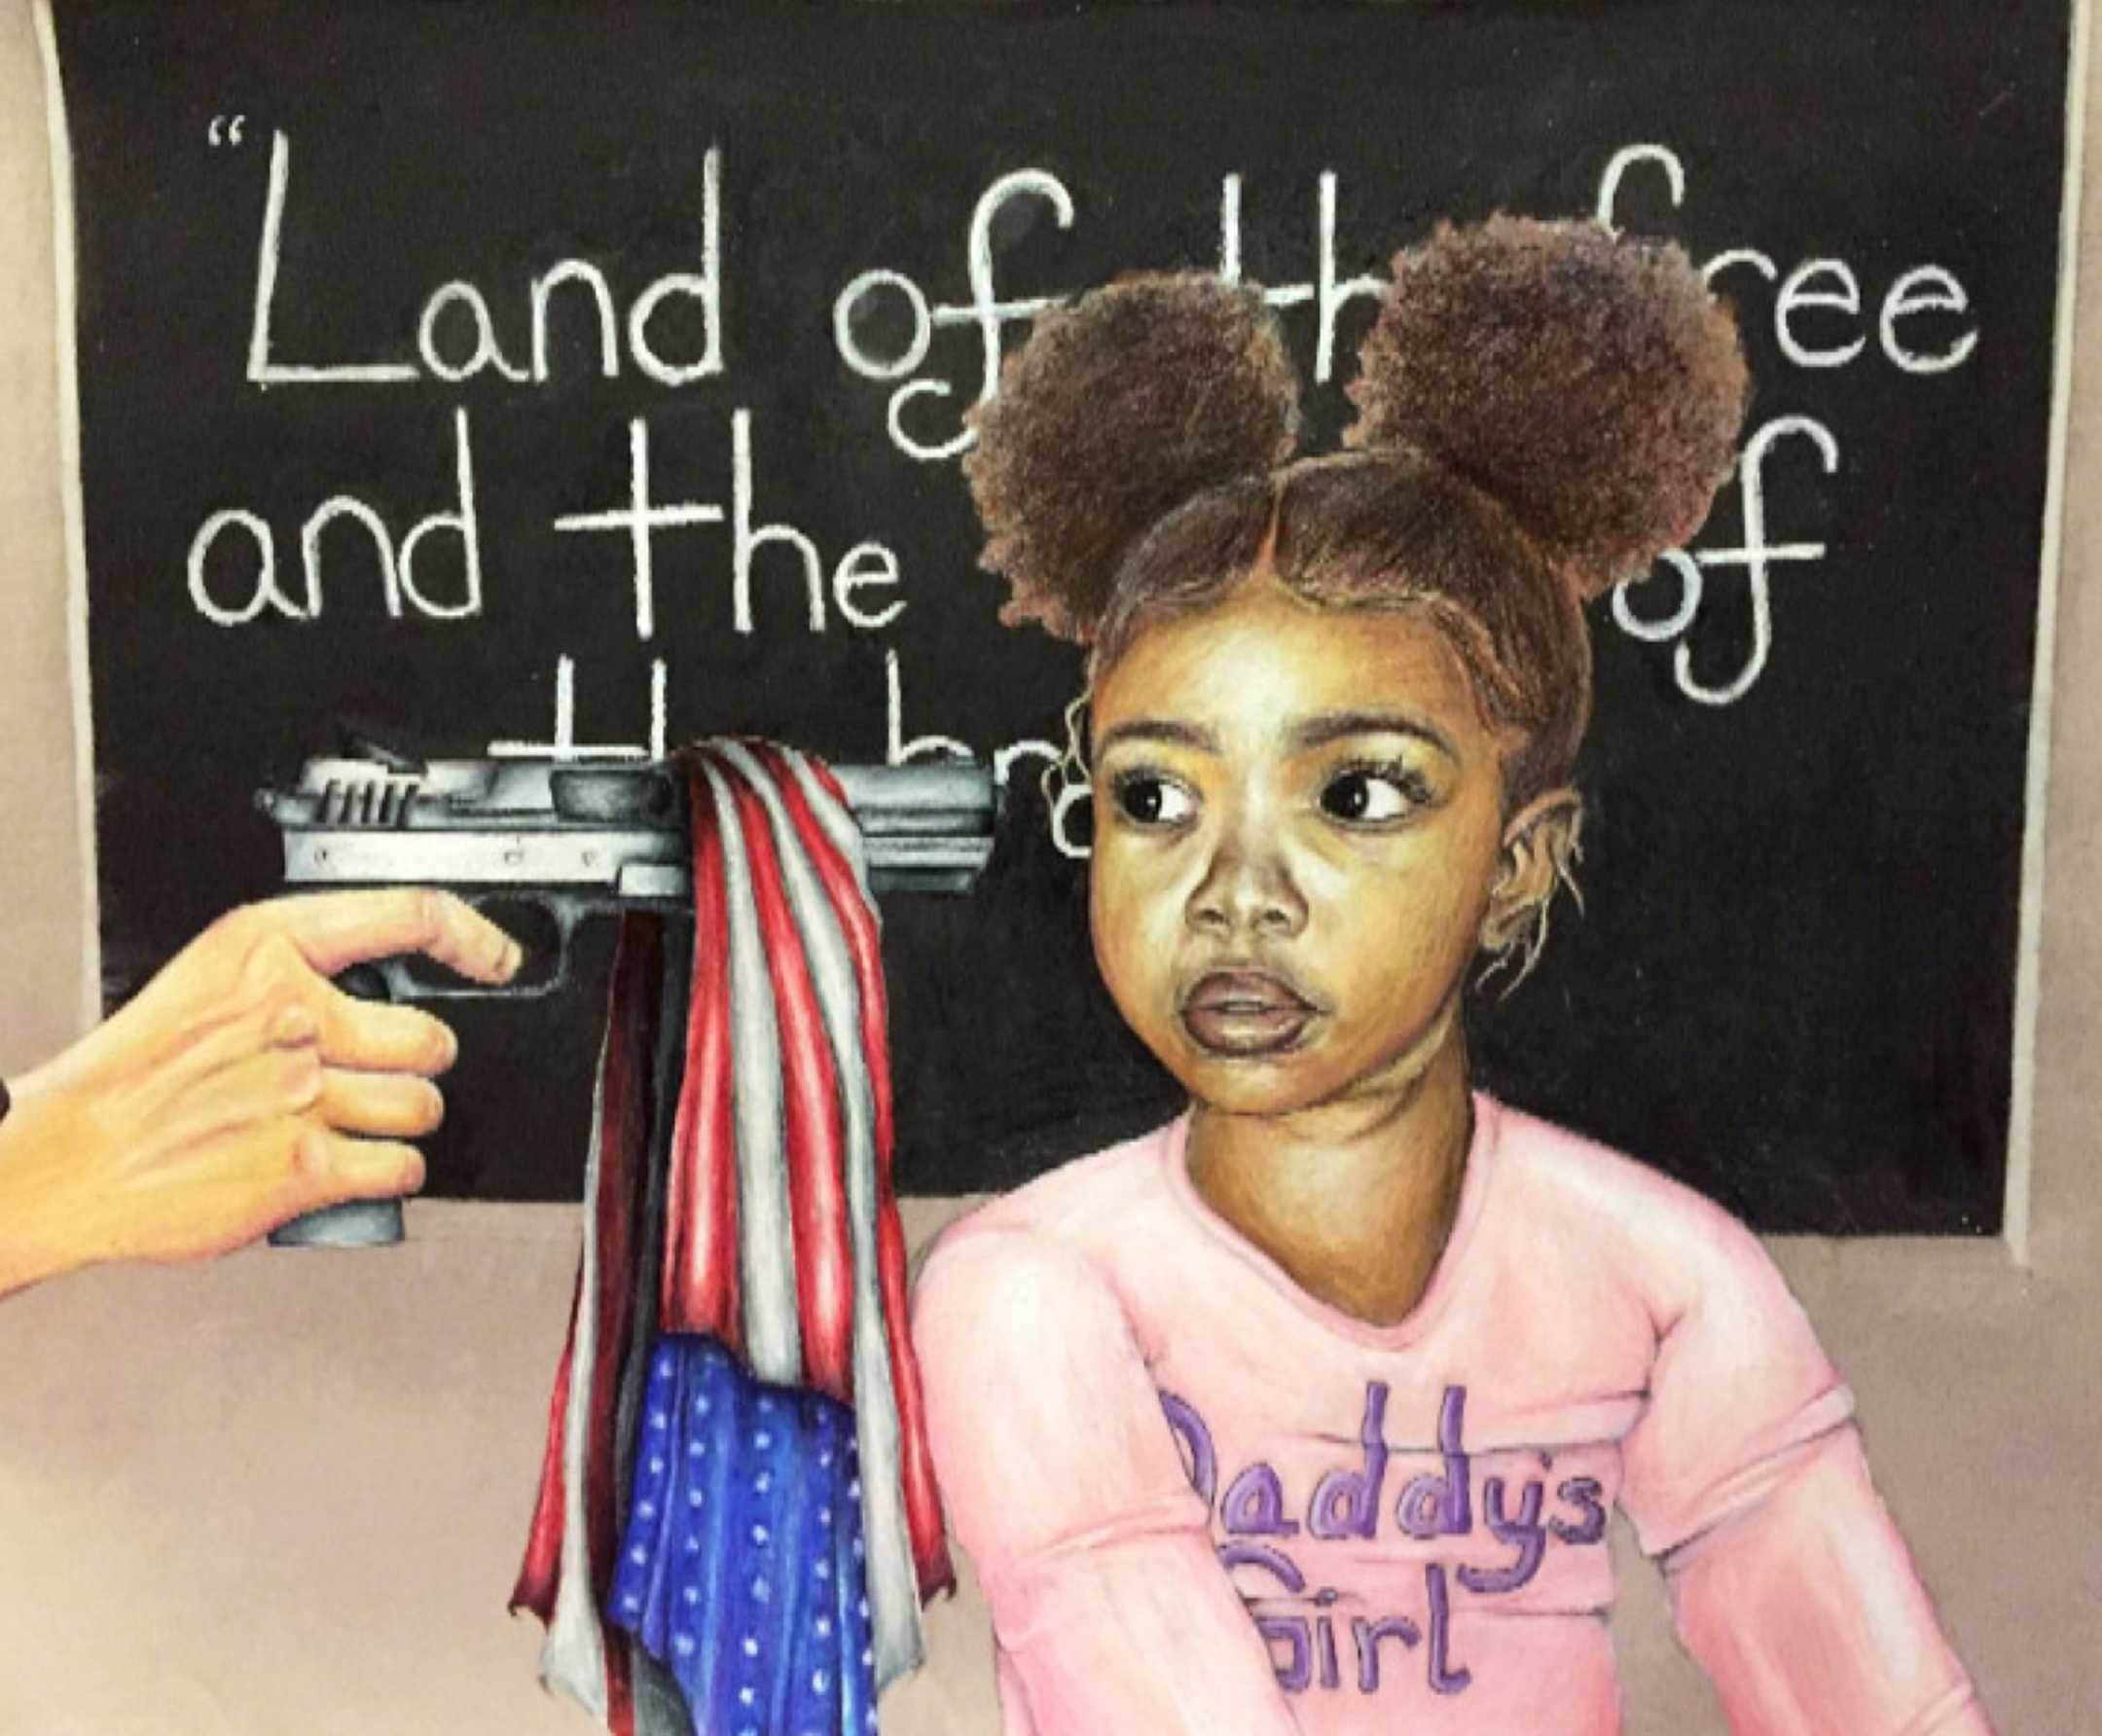 Illustration showing a young black girl in a pink shirt, looking at a figure off-frame who is pointing a gun at her head as a flag hangs from the barrel and the words "land of the free and home of the brave" are written on a chalkboard behind her